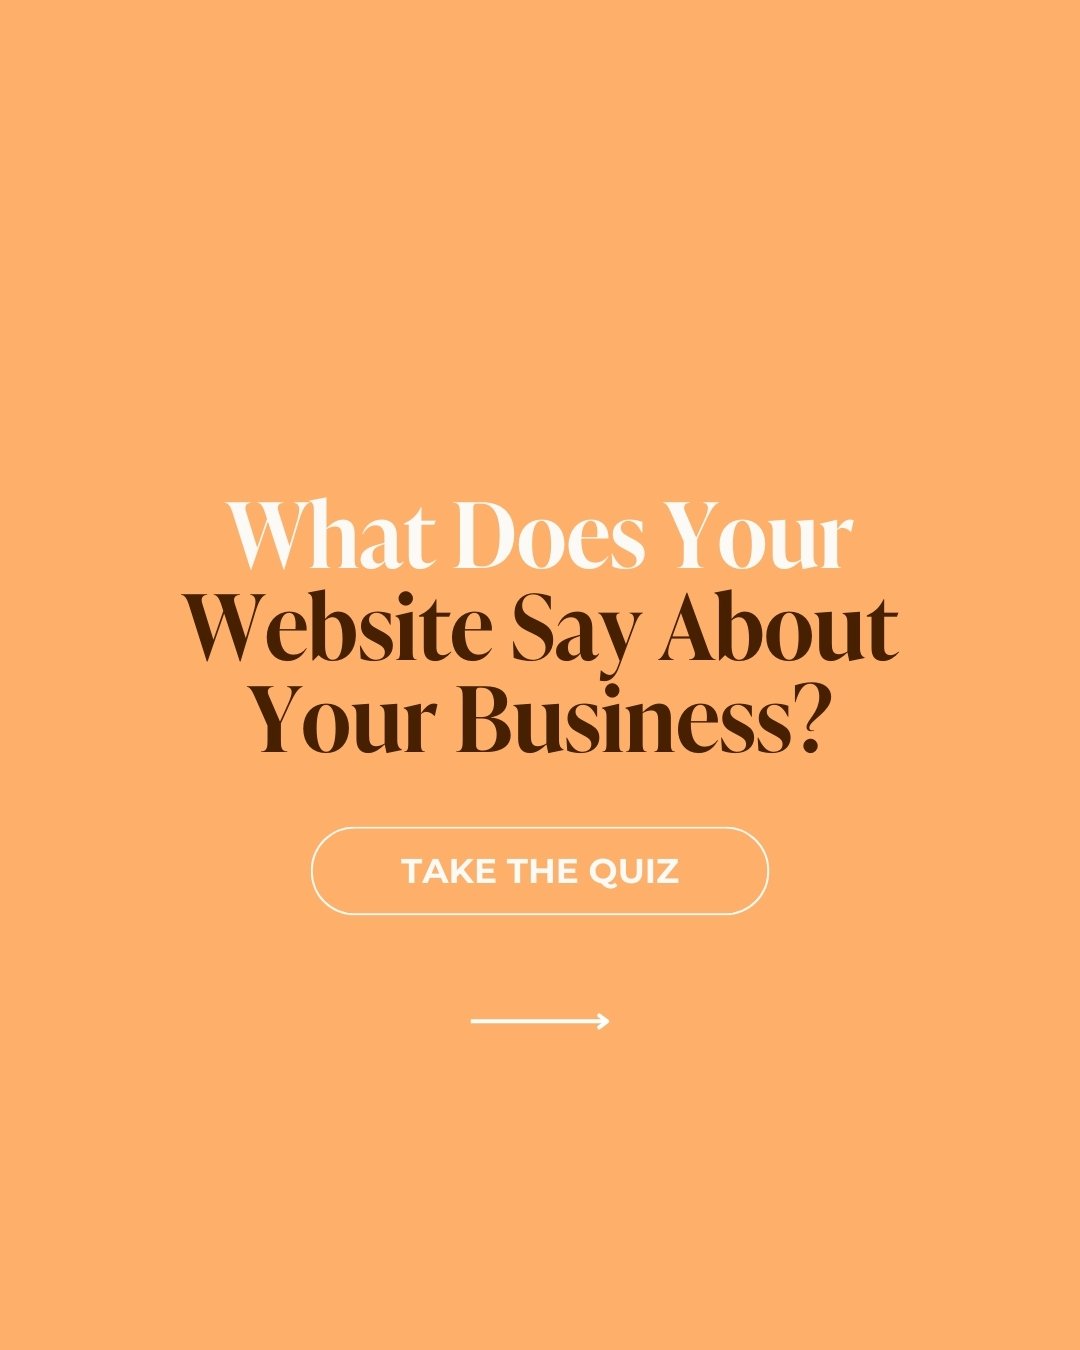 Results here 👇🏻

If you got:

👉 Mostly A's: Your website is a perfect example of your brand! It's user-friendly, informative, and leaves a lasting impression.

👉 Mostly B's: Your website has potential, but it could use some TLC. Consider streamli